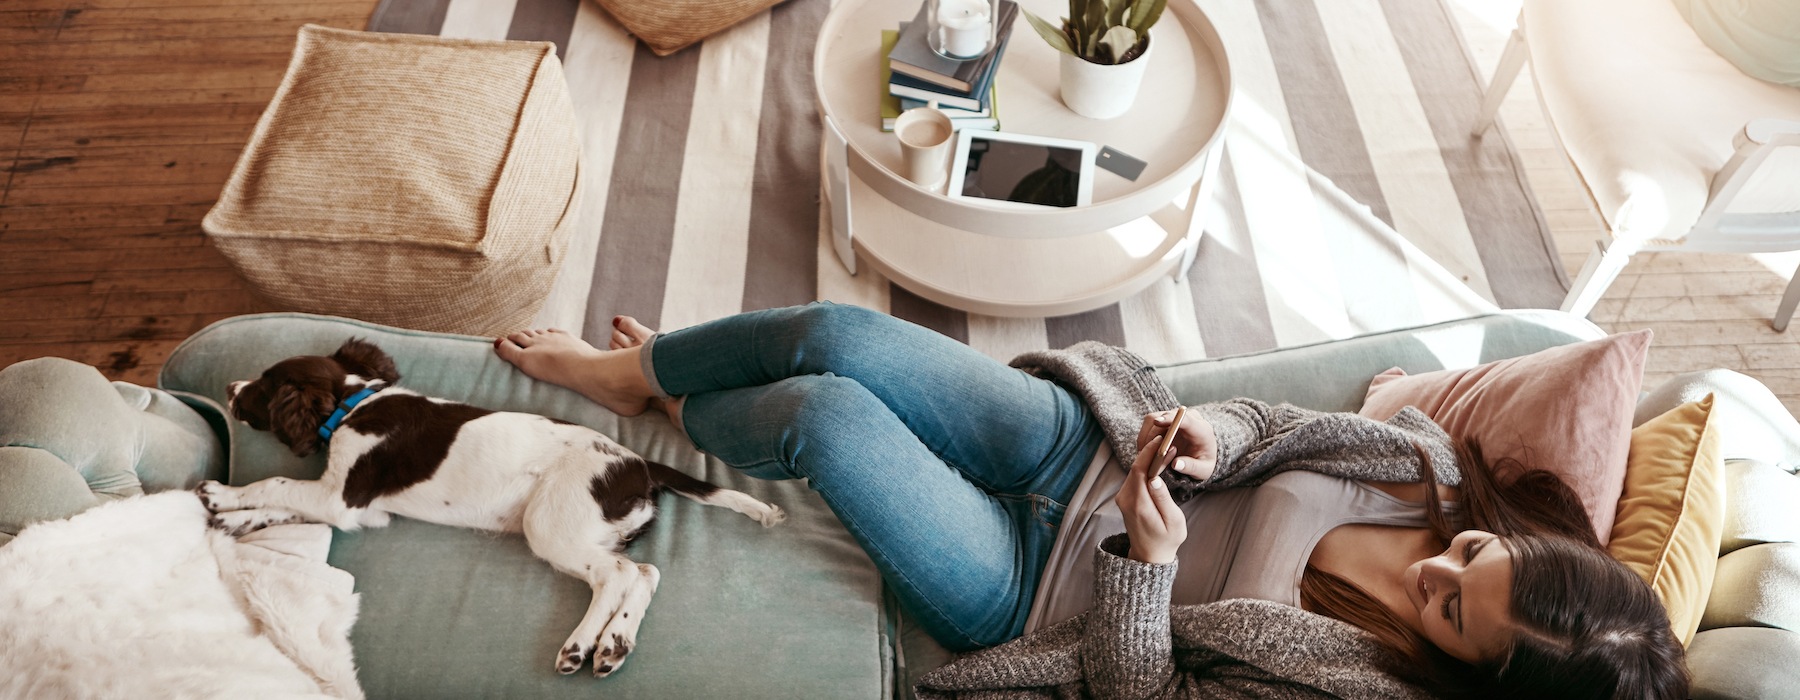 lifestyle image of a woman laying beside her pet on a couch